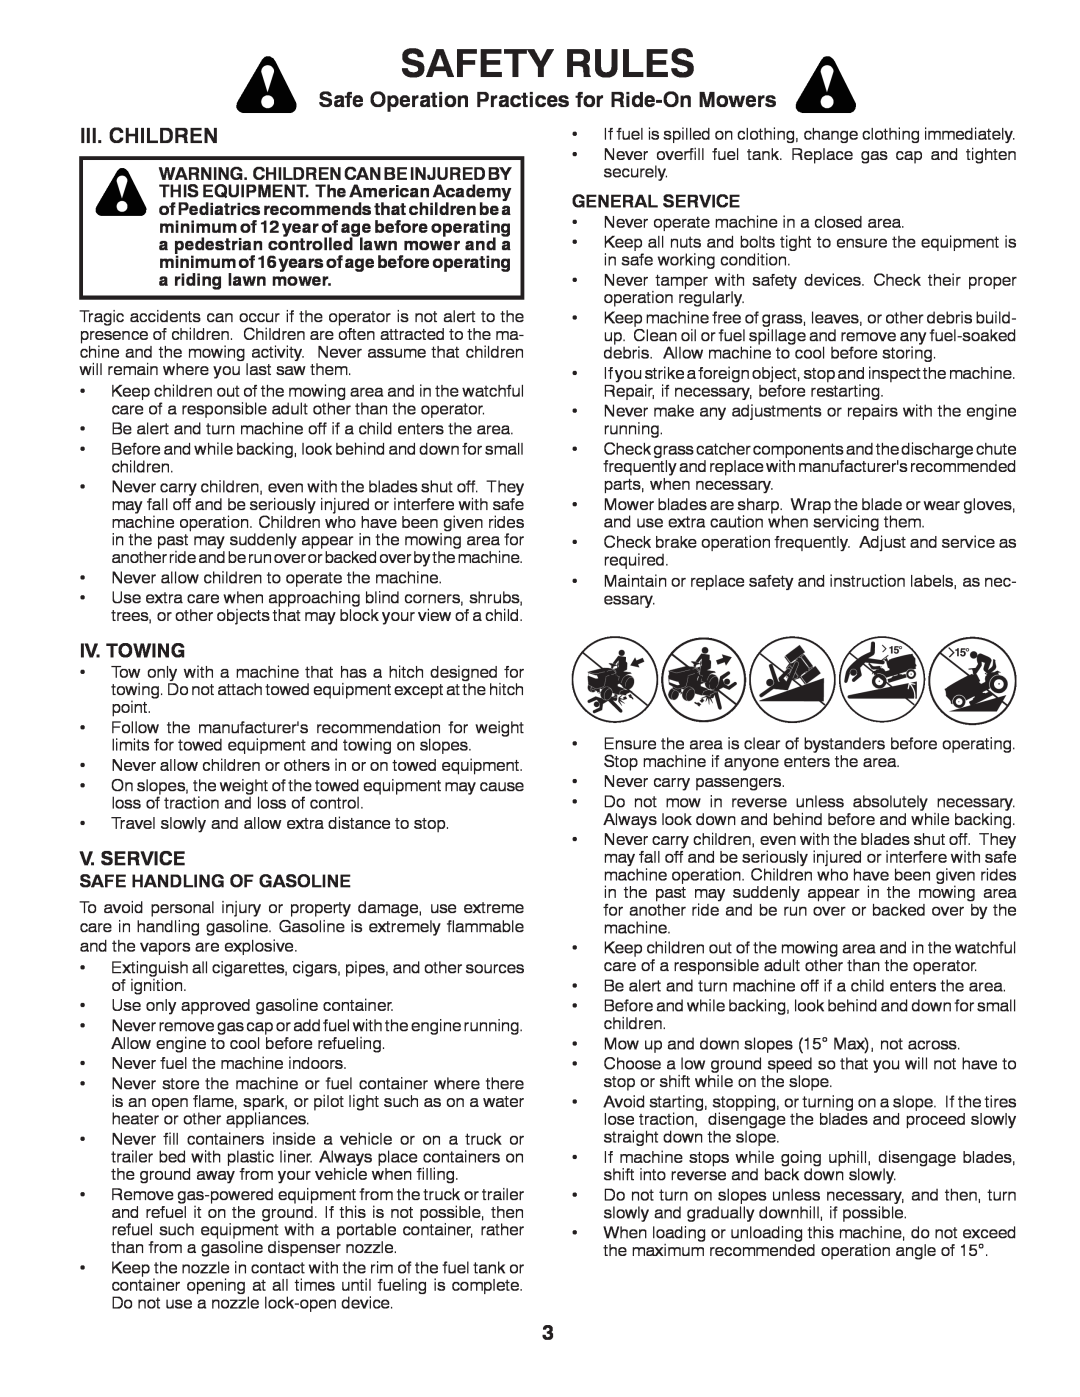 Husqvarna 960430173 owner manual Iii. Children, Safety Rules, Safe Operation Practices for Ride-OnMowers, General Service 